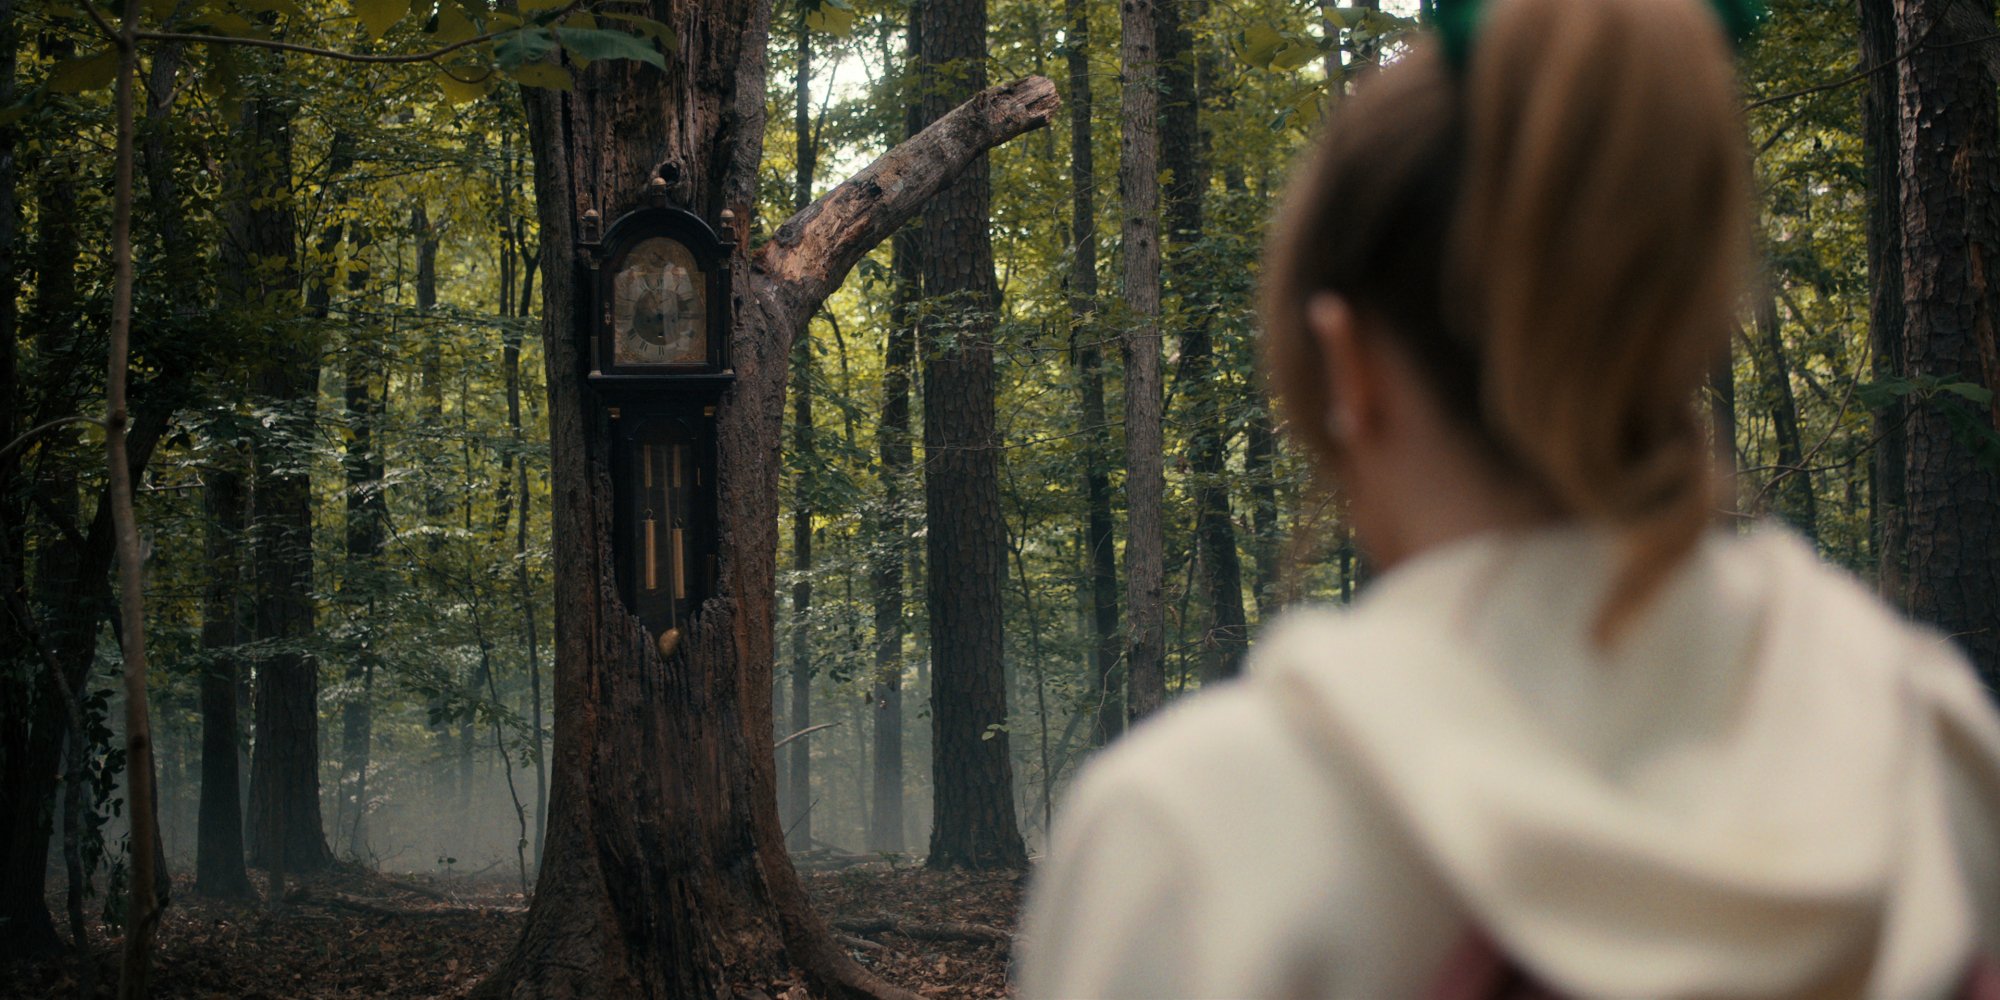 A young woman stares at a grandfather clock embedded in a tree trunk.